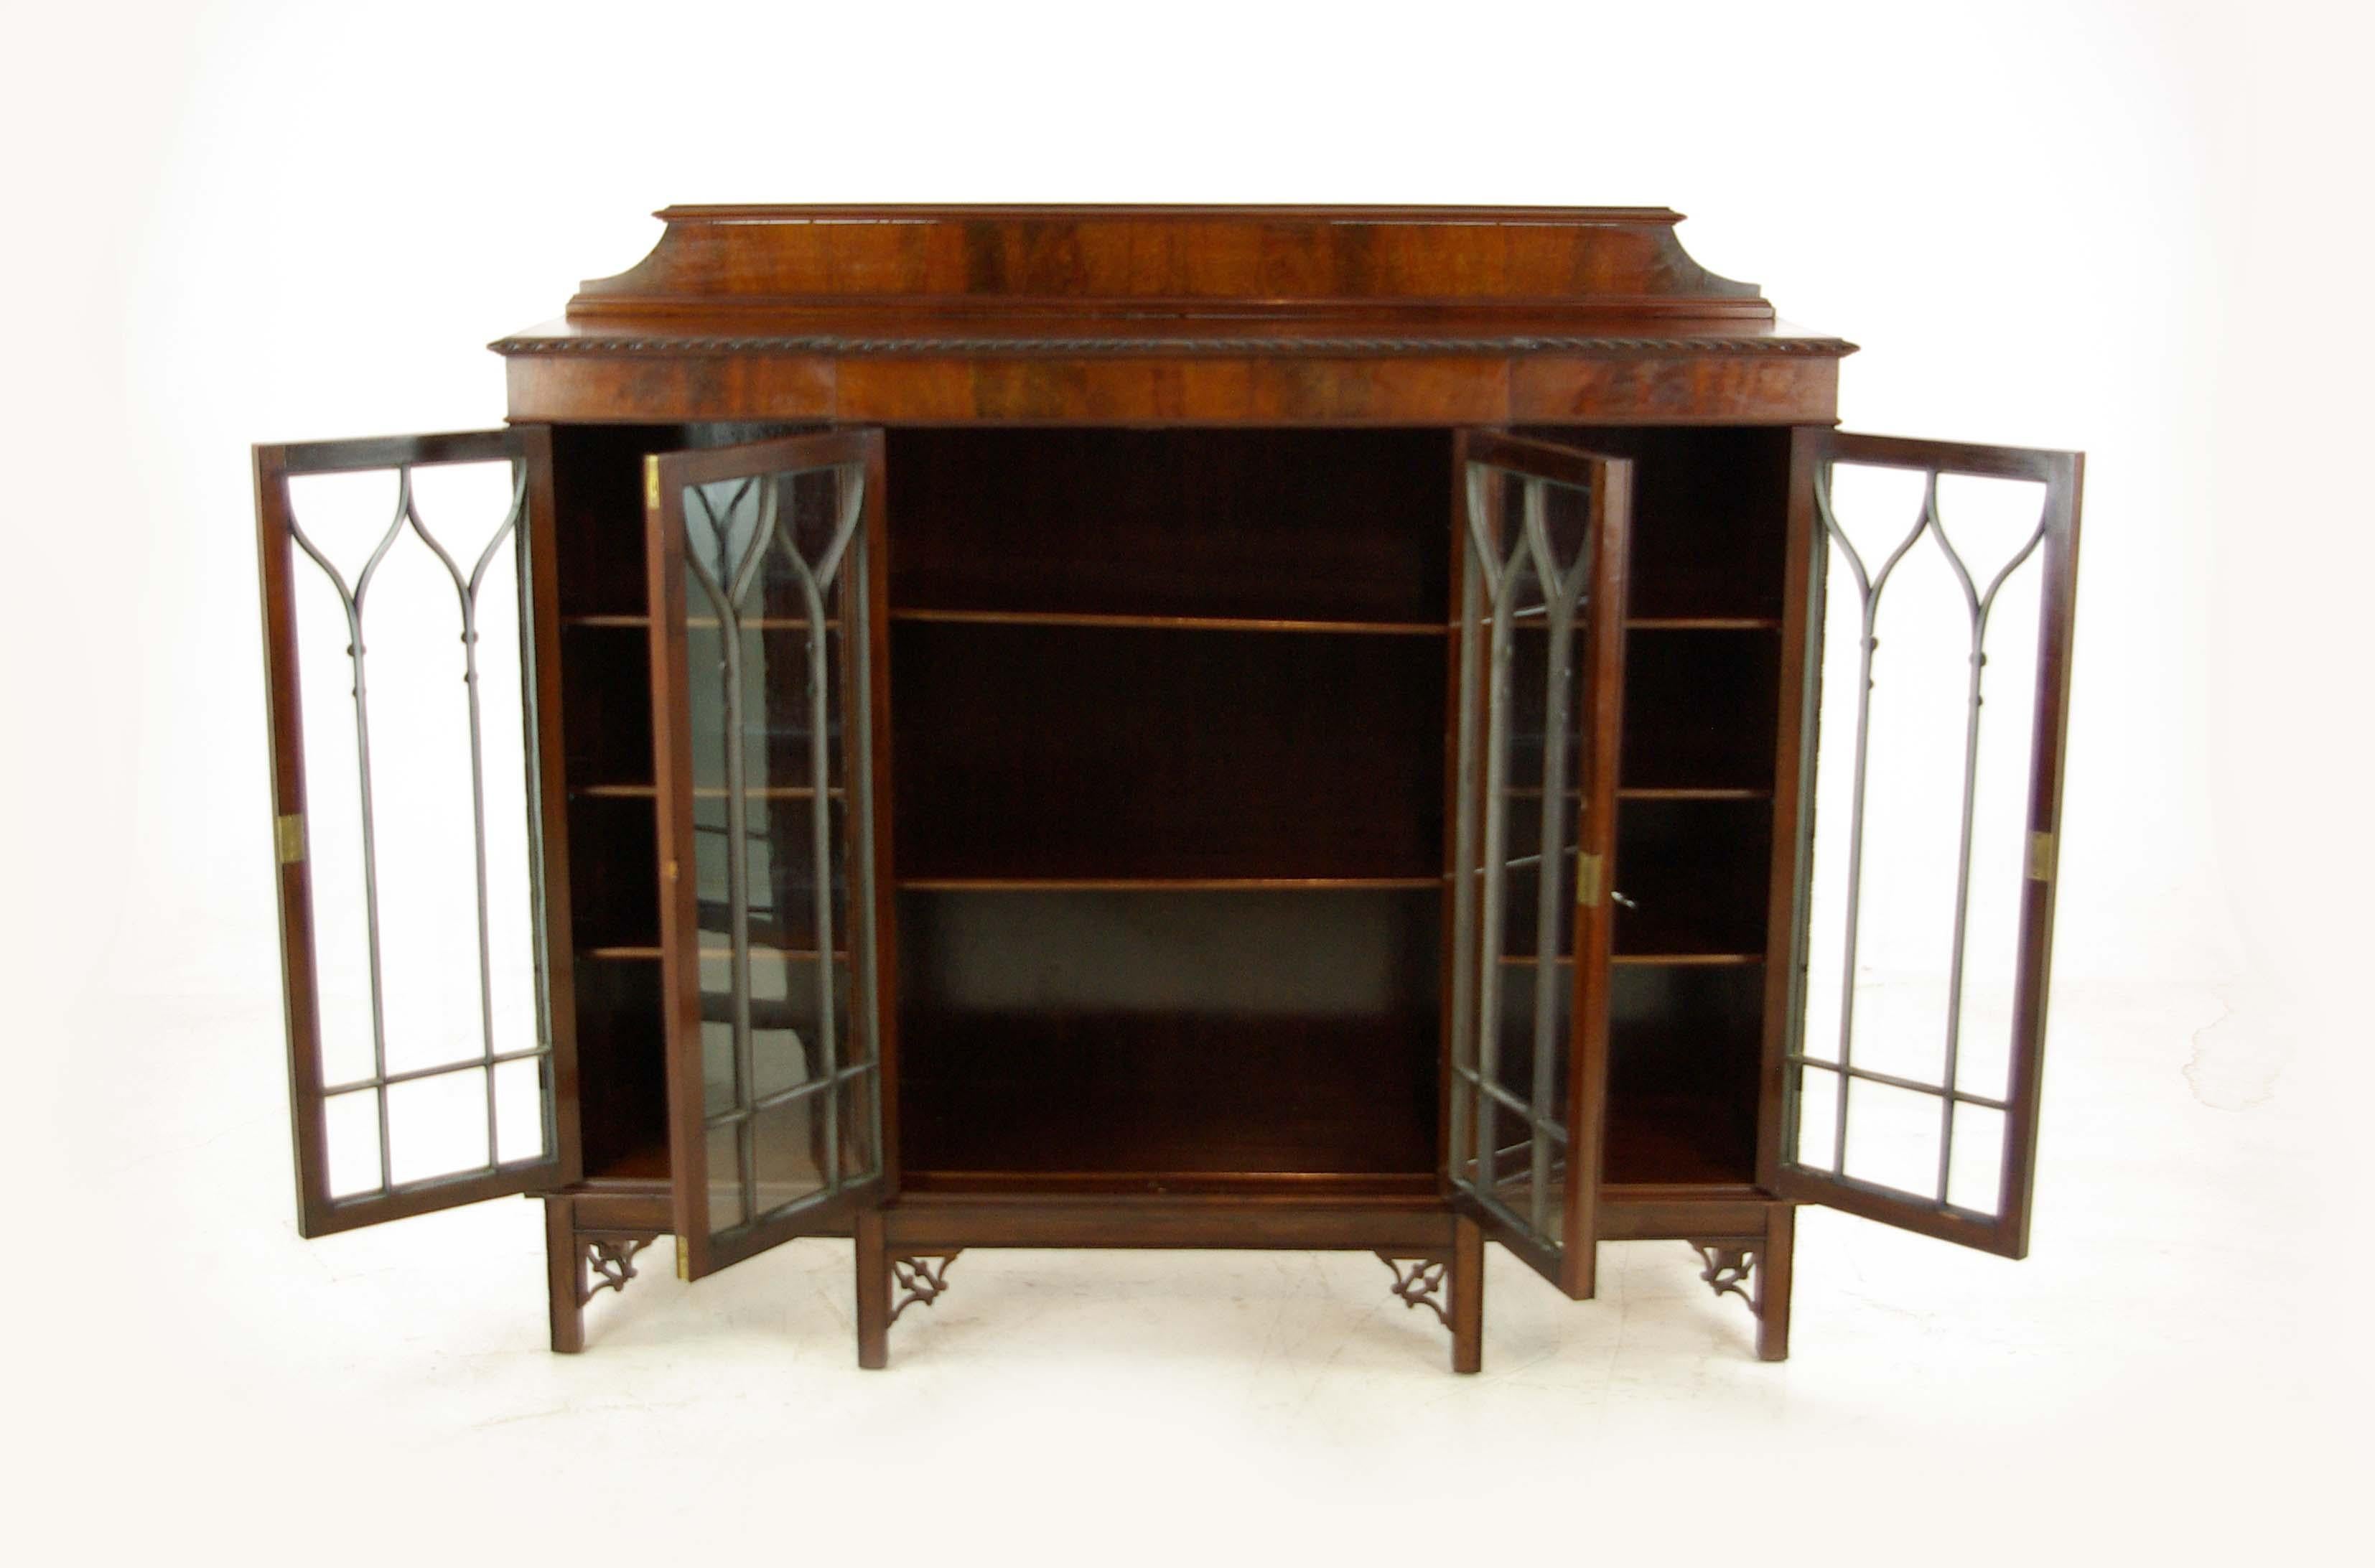 Antique Mahogany Bookcase, Breakfront Bookcase, Scotland 1900, Antique Furniture, B1026

Scotland 1900
Solid Mahogany with Original Finish
Raised Moulded Back Above a Break Front Top 
Gardooned Frieze
Underneath Four Astragal Doors
Working Locks and